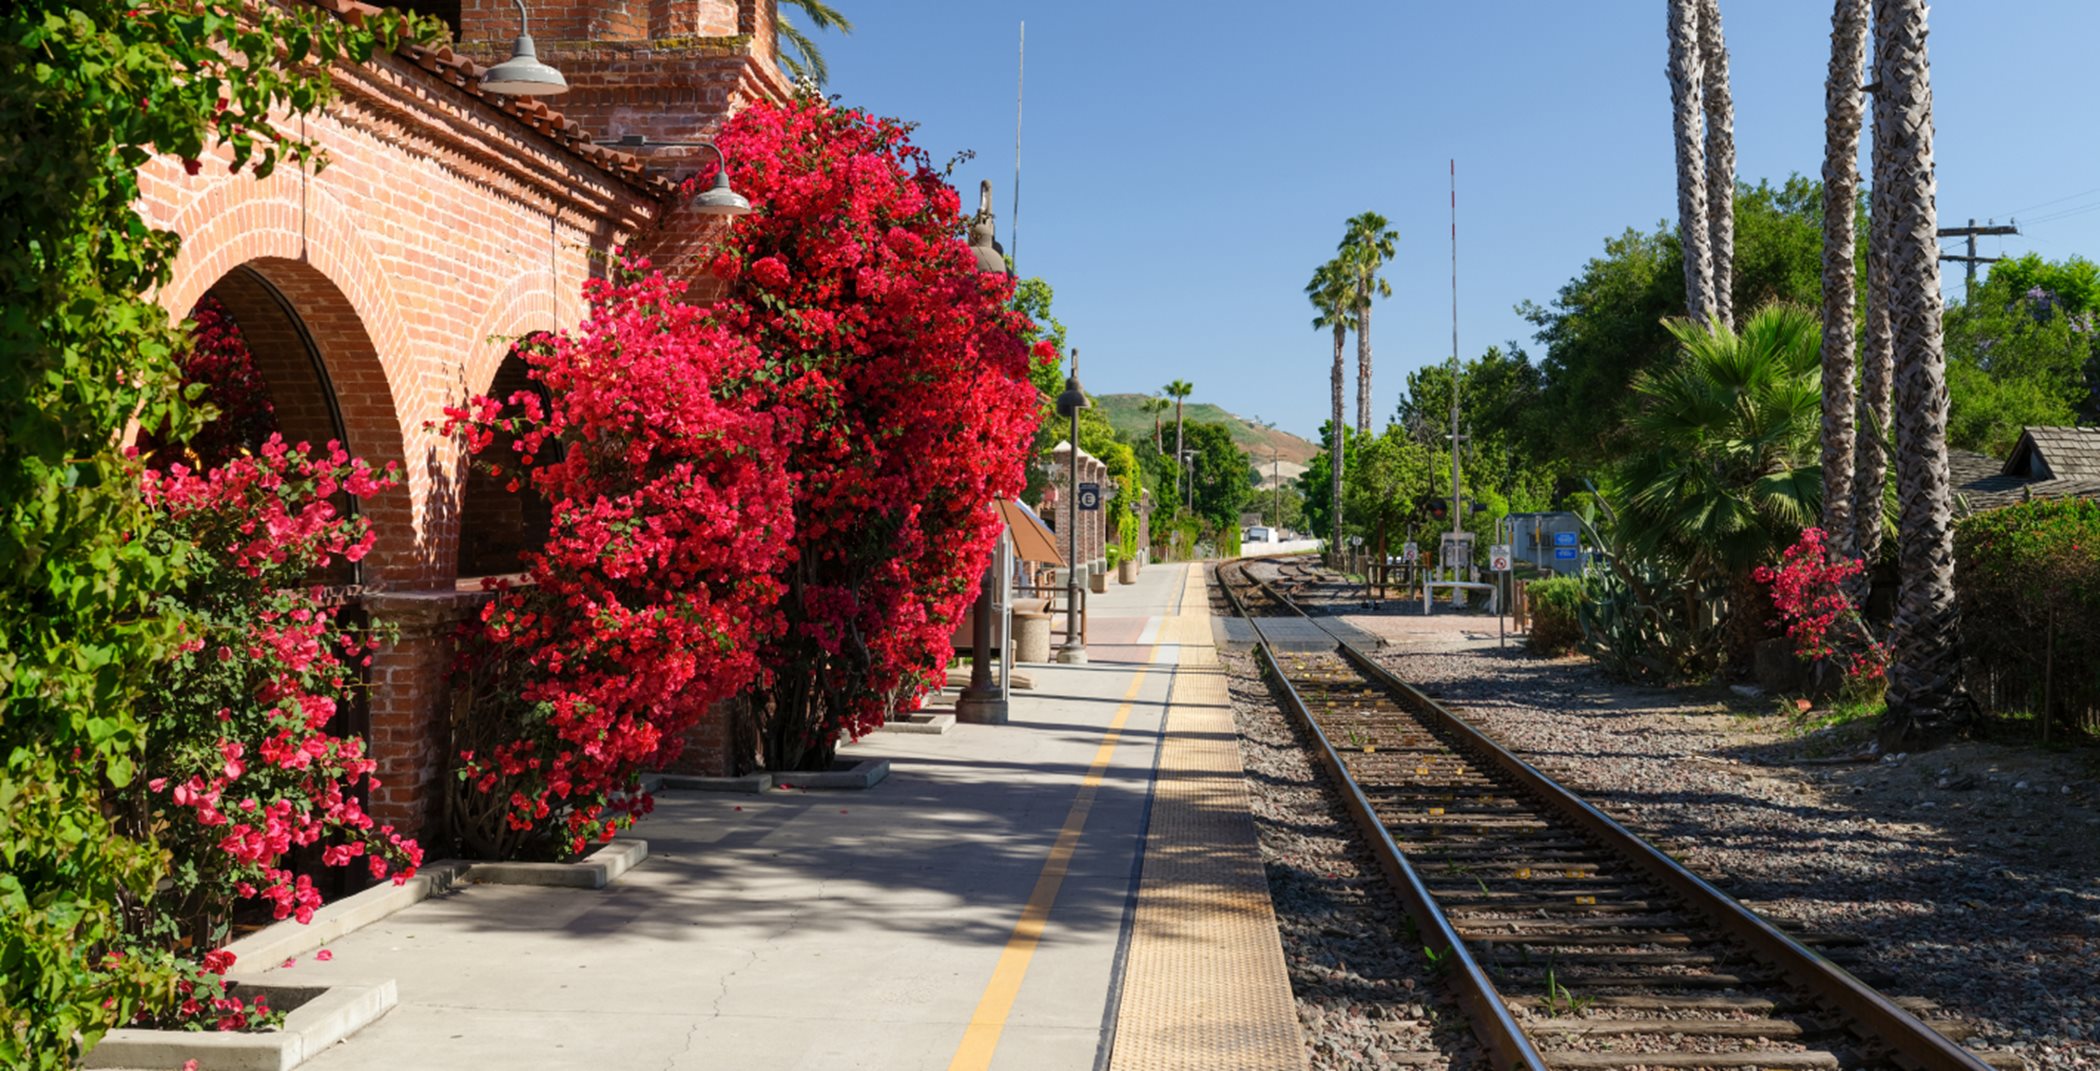 Train station with pink flowers